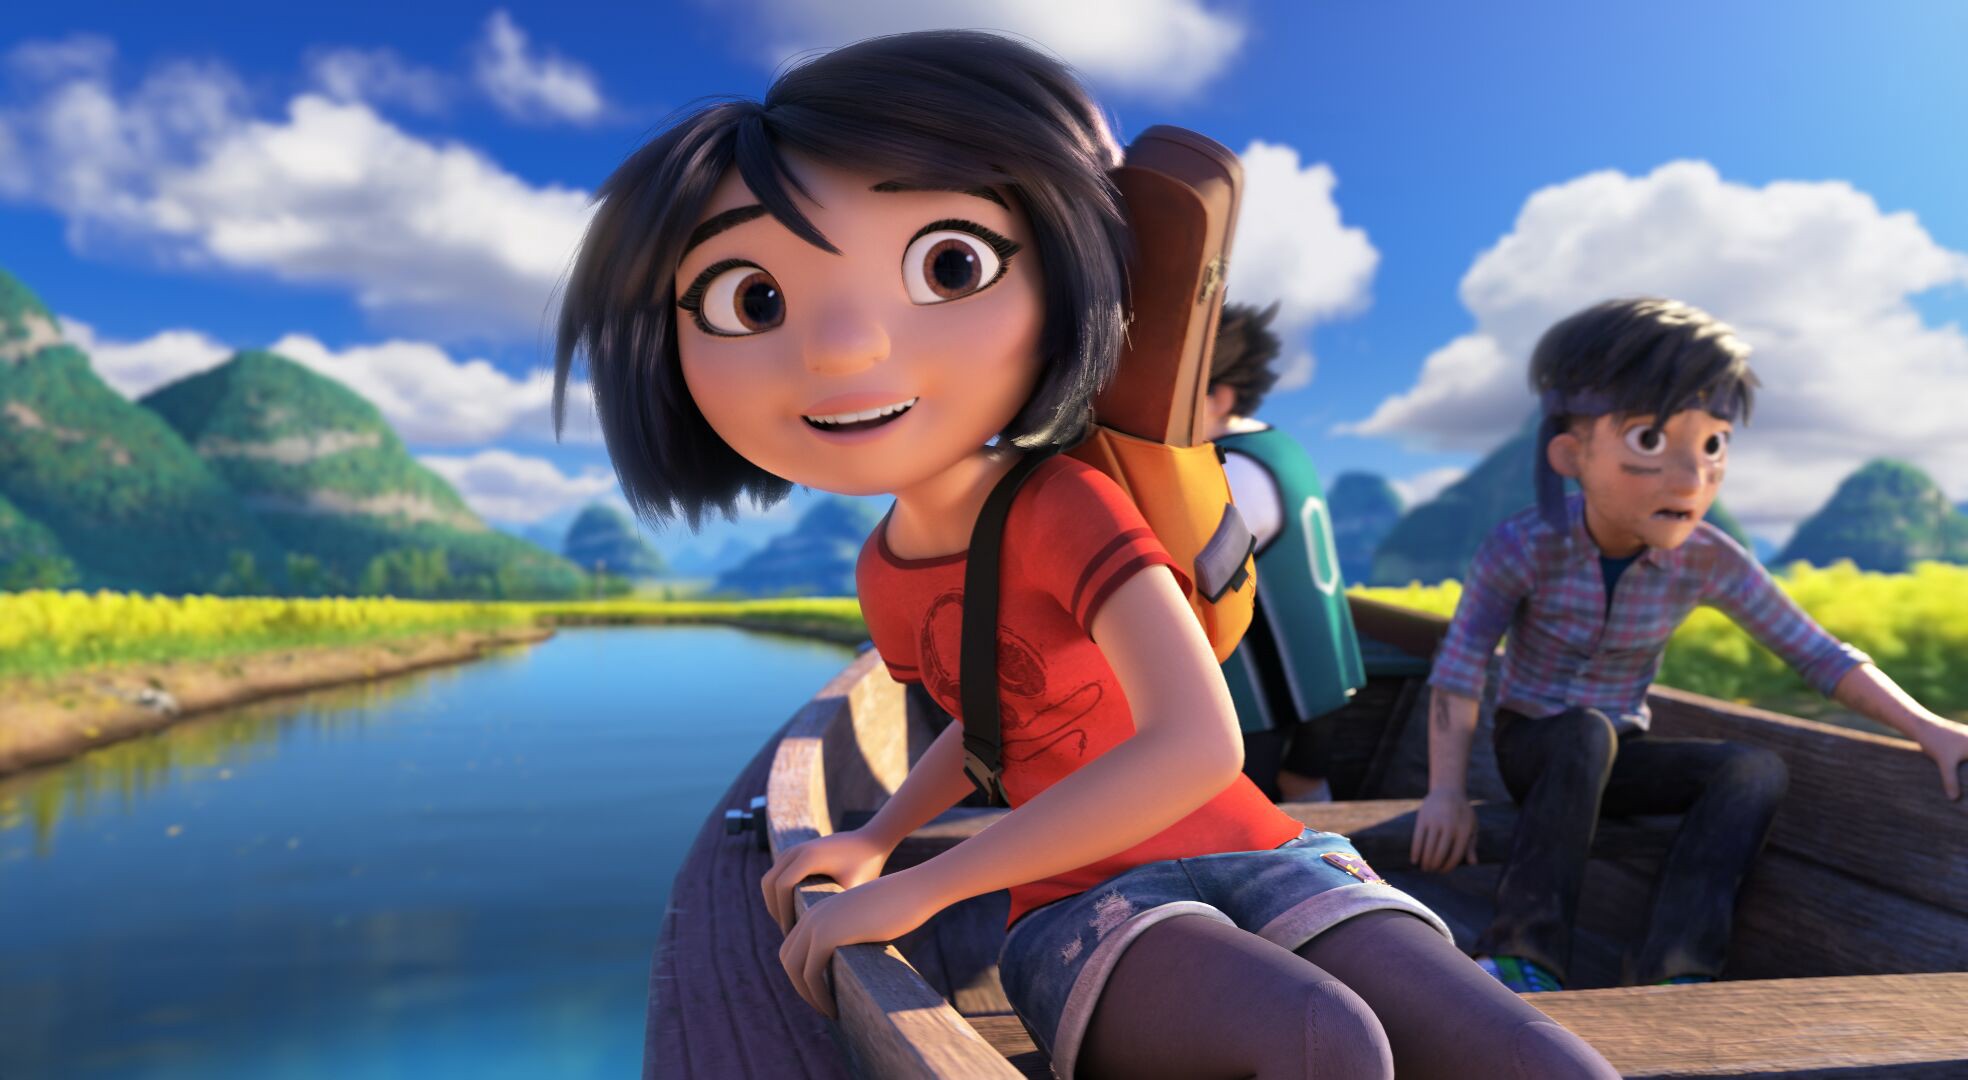 Yi, Peng, and Jin sail down a river in Tibet. Behind, them, a blue sky and fluffy clouds over mountains can be seen. Yi has an excited smile on her face and Jin looks frightened.